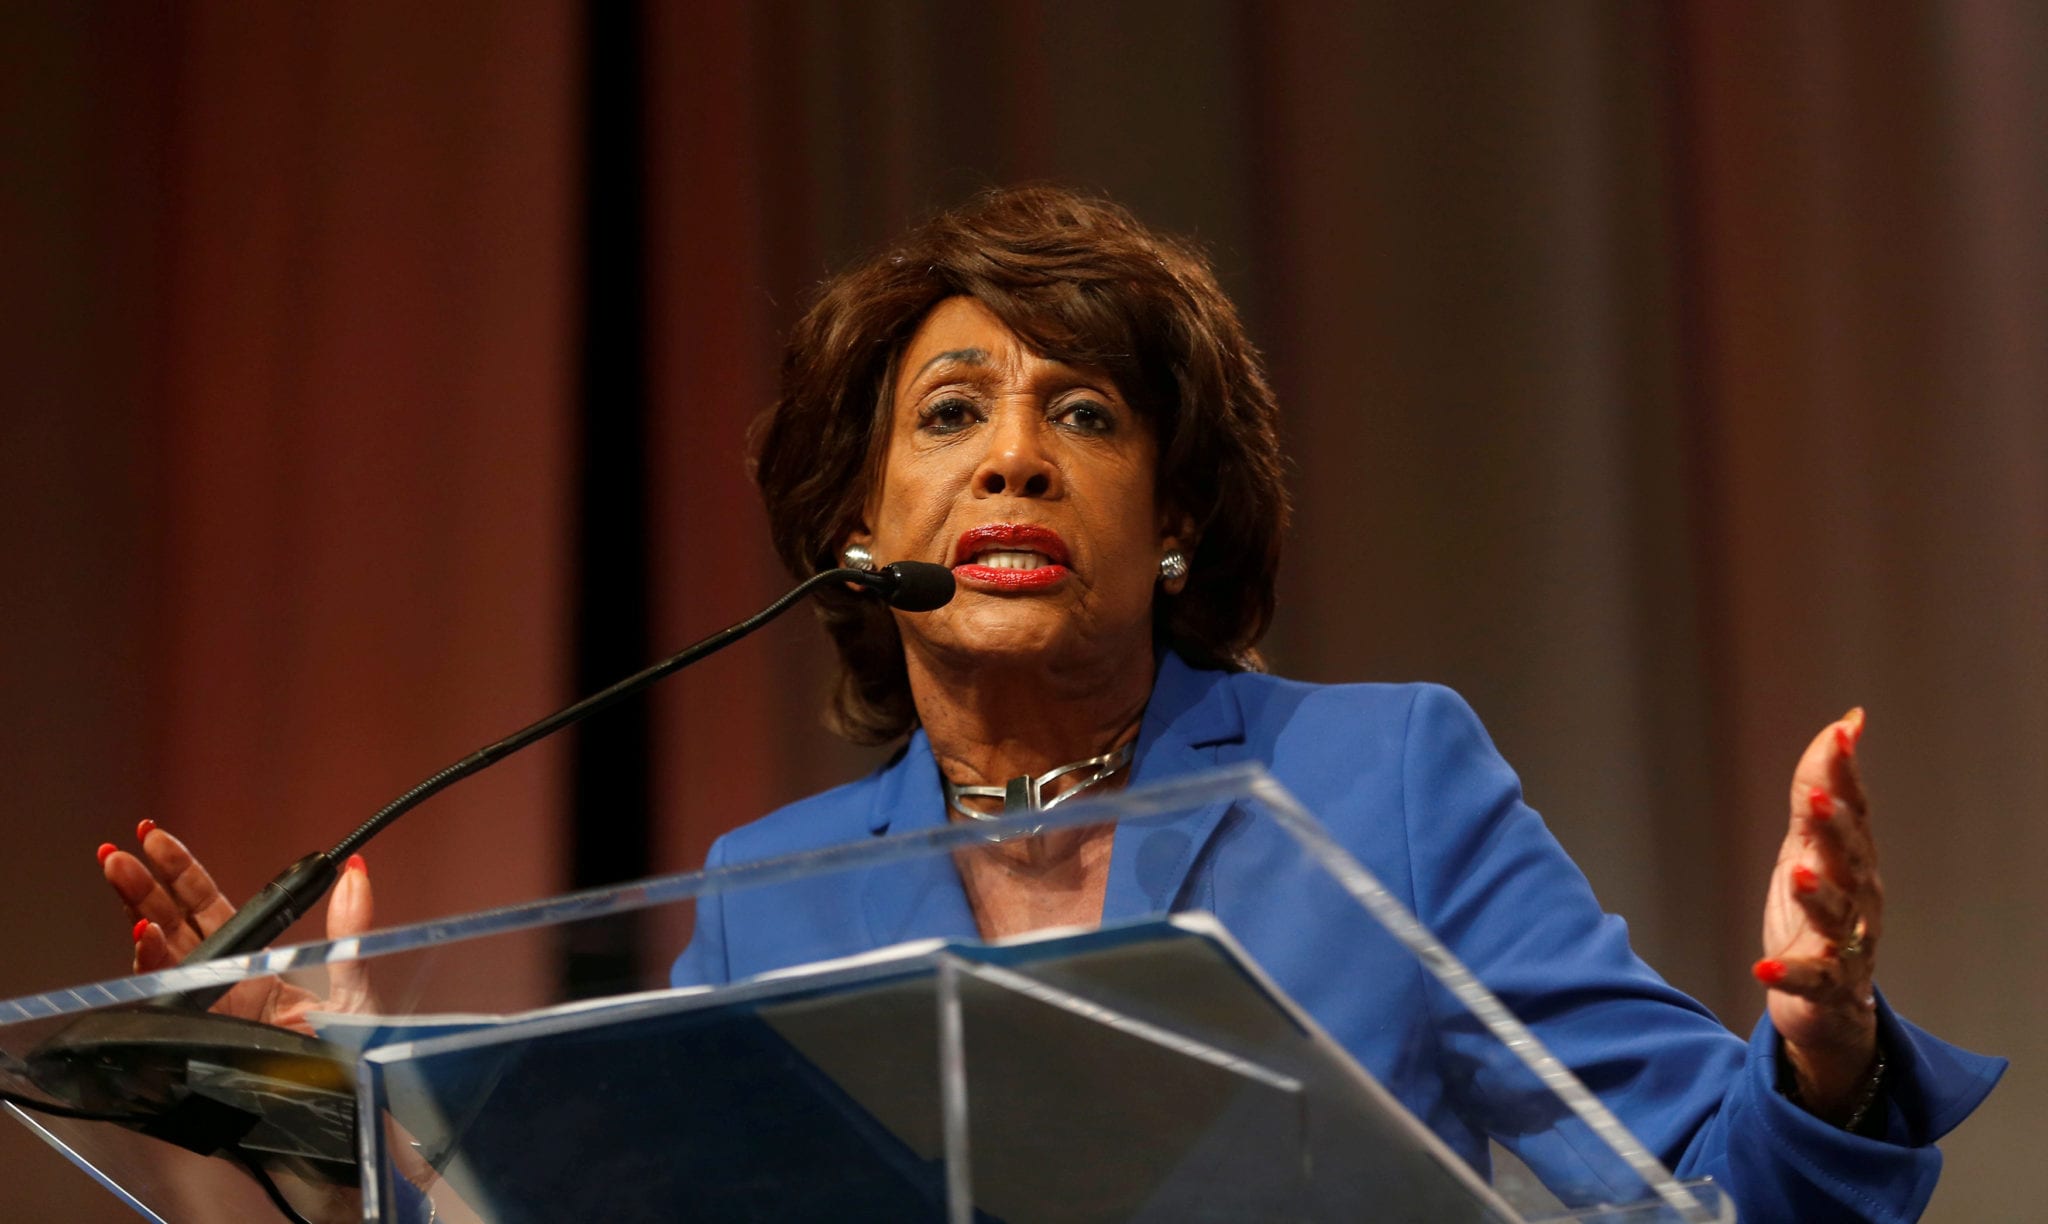 Maxine Waters Criticizes Trump for His Attacks Against Mail-In Ballots